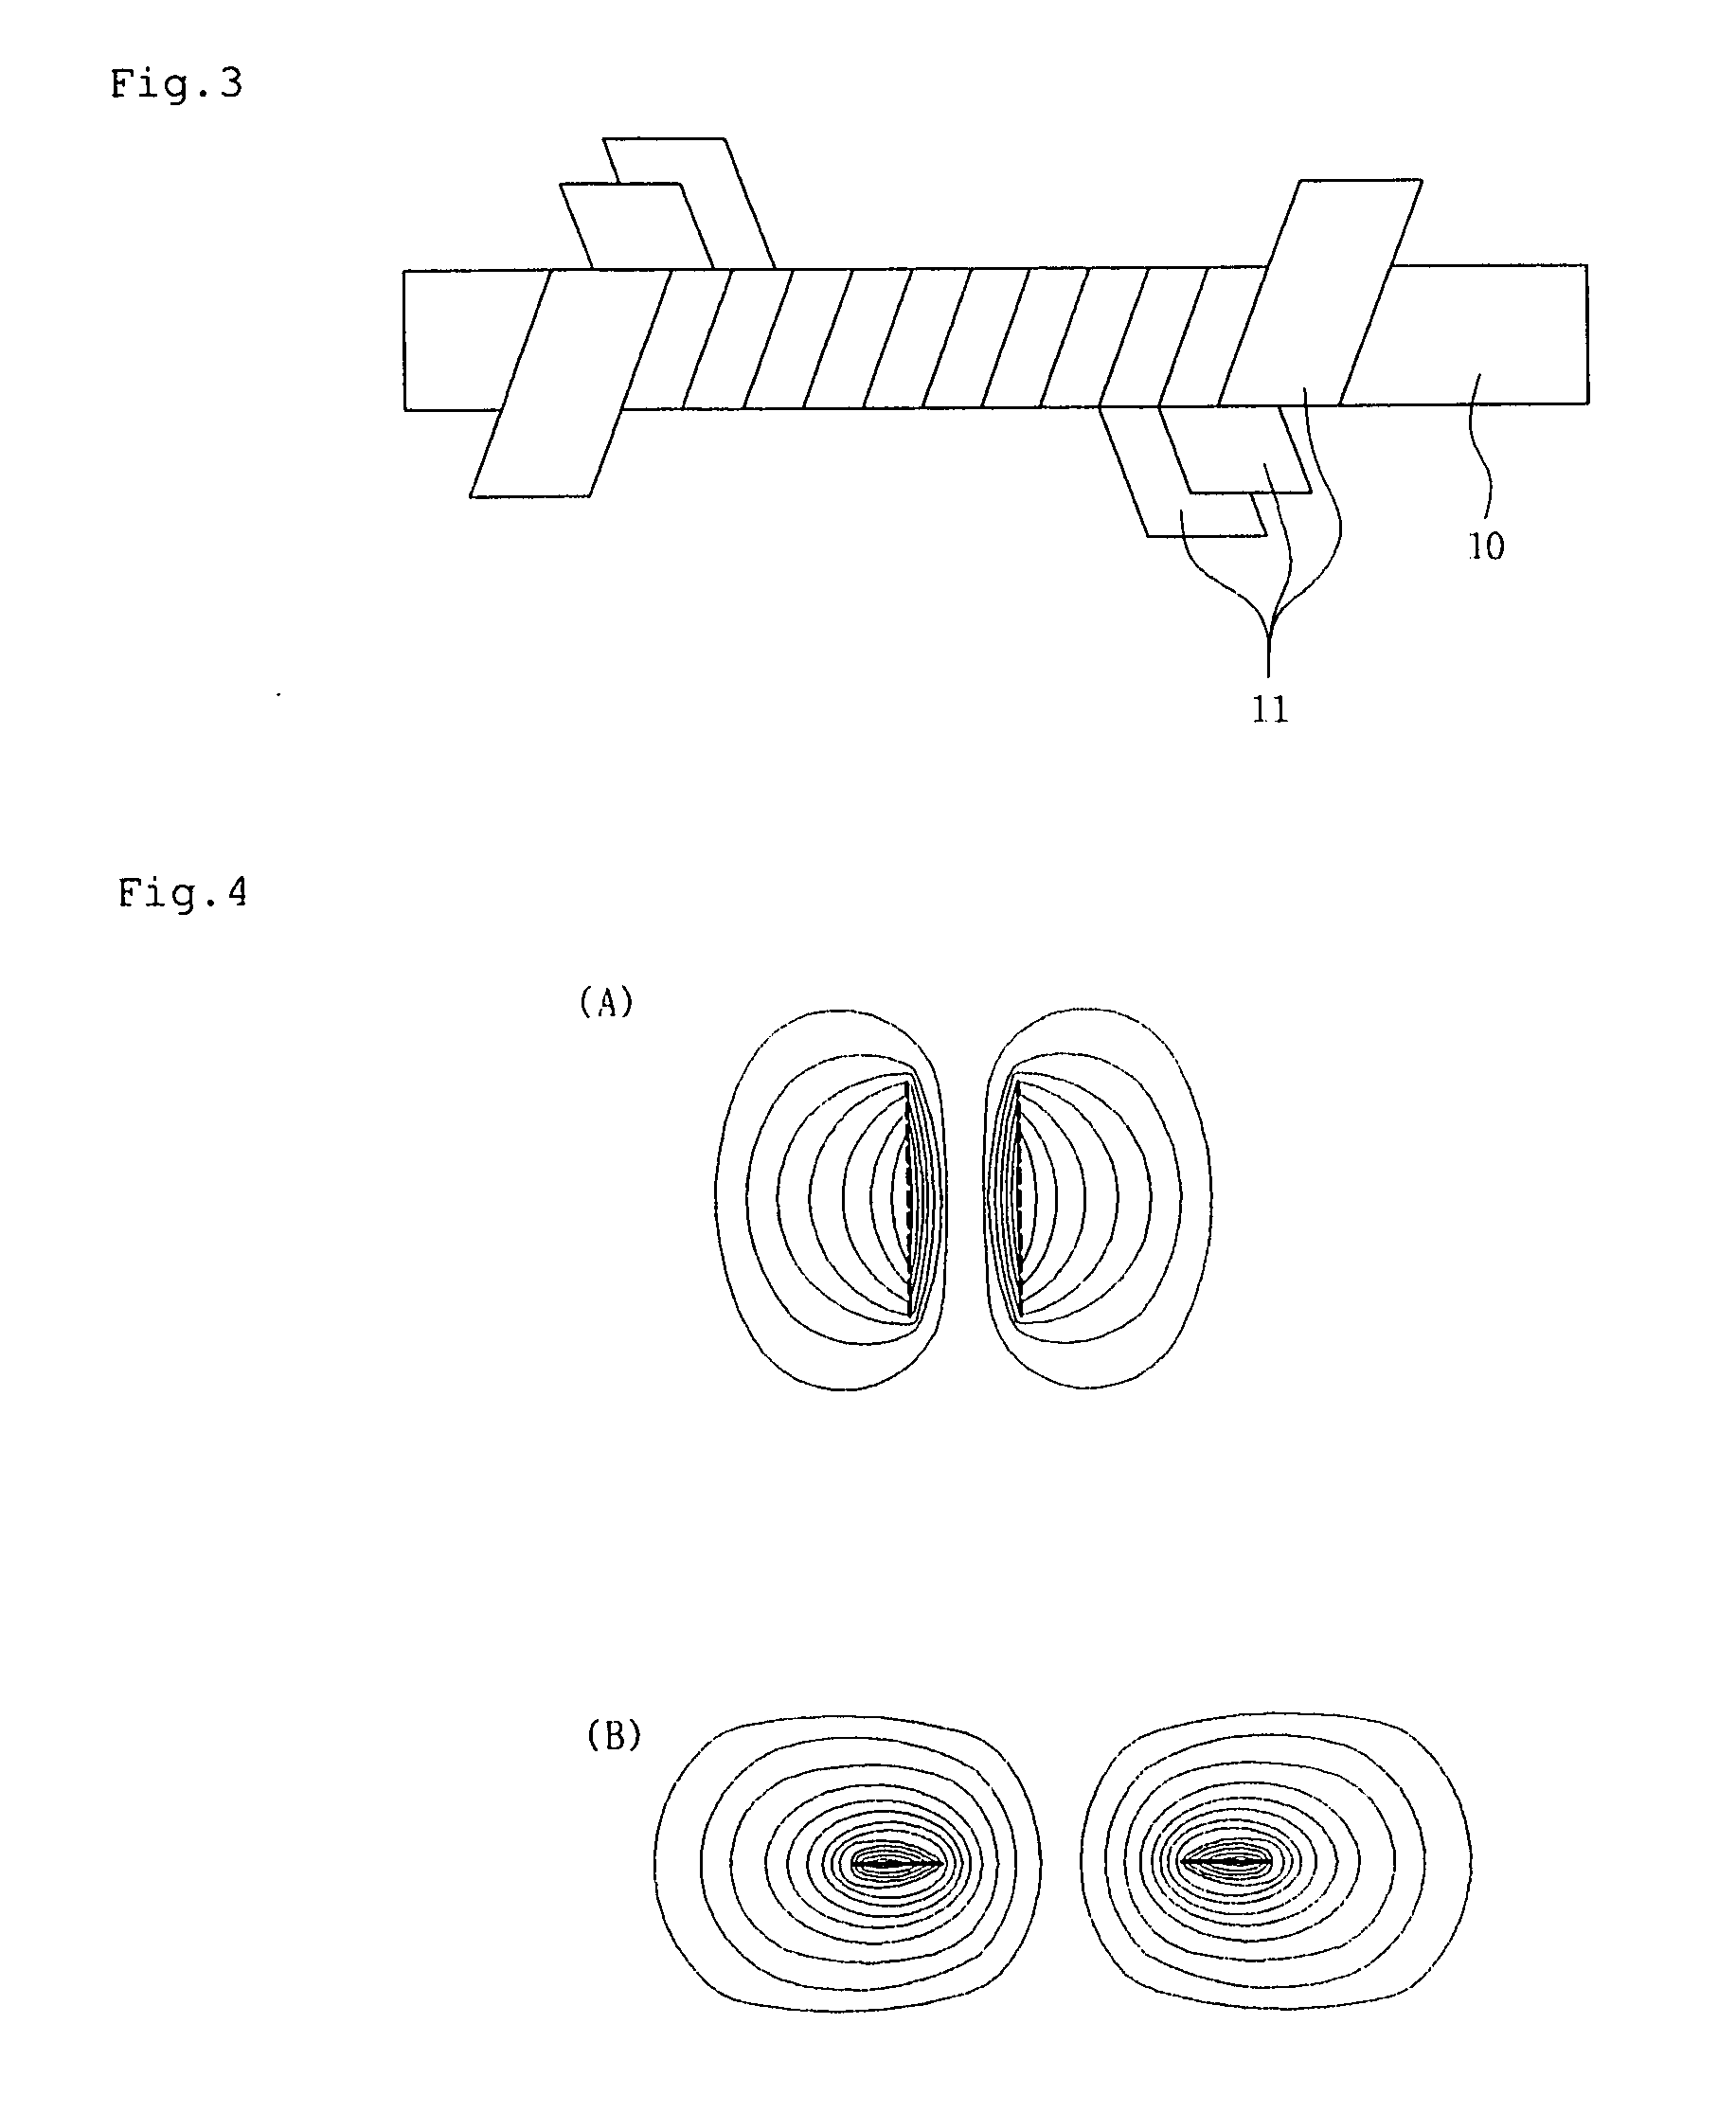 Method of manufacturing continuous disk winding for high-voltage superconducting transformers